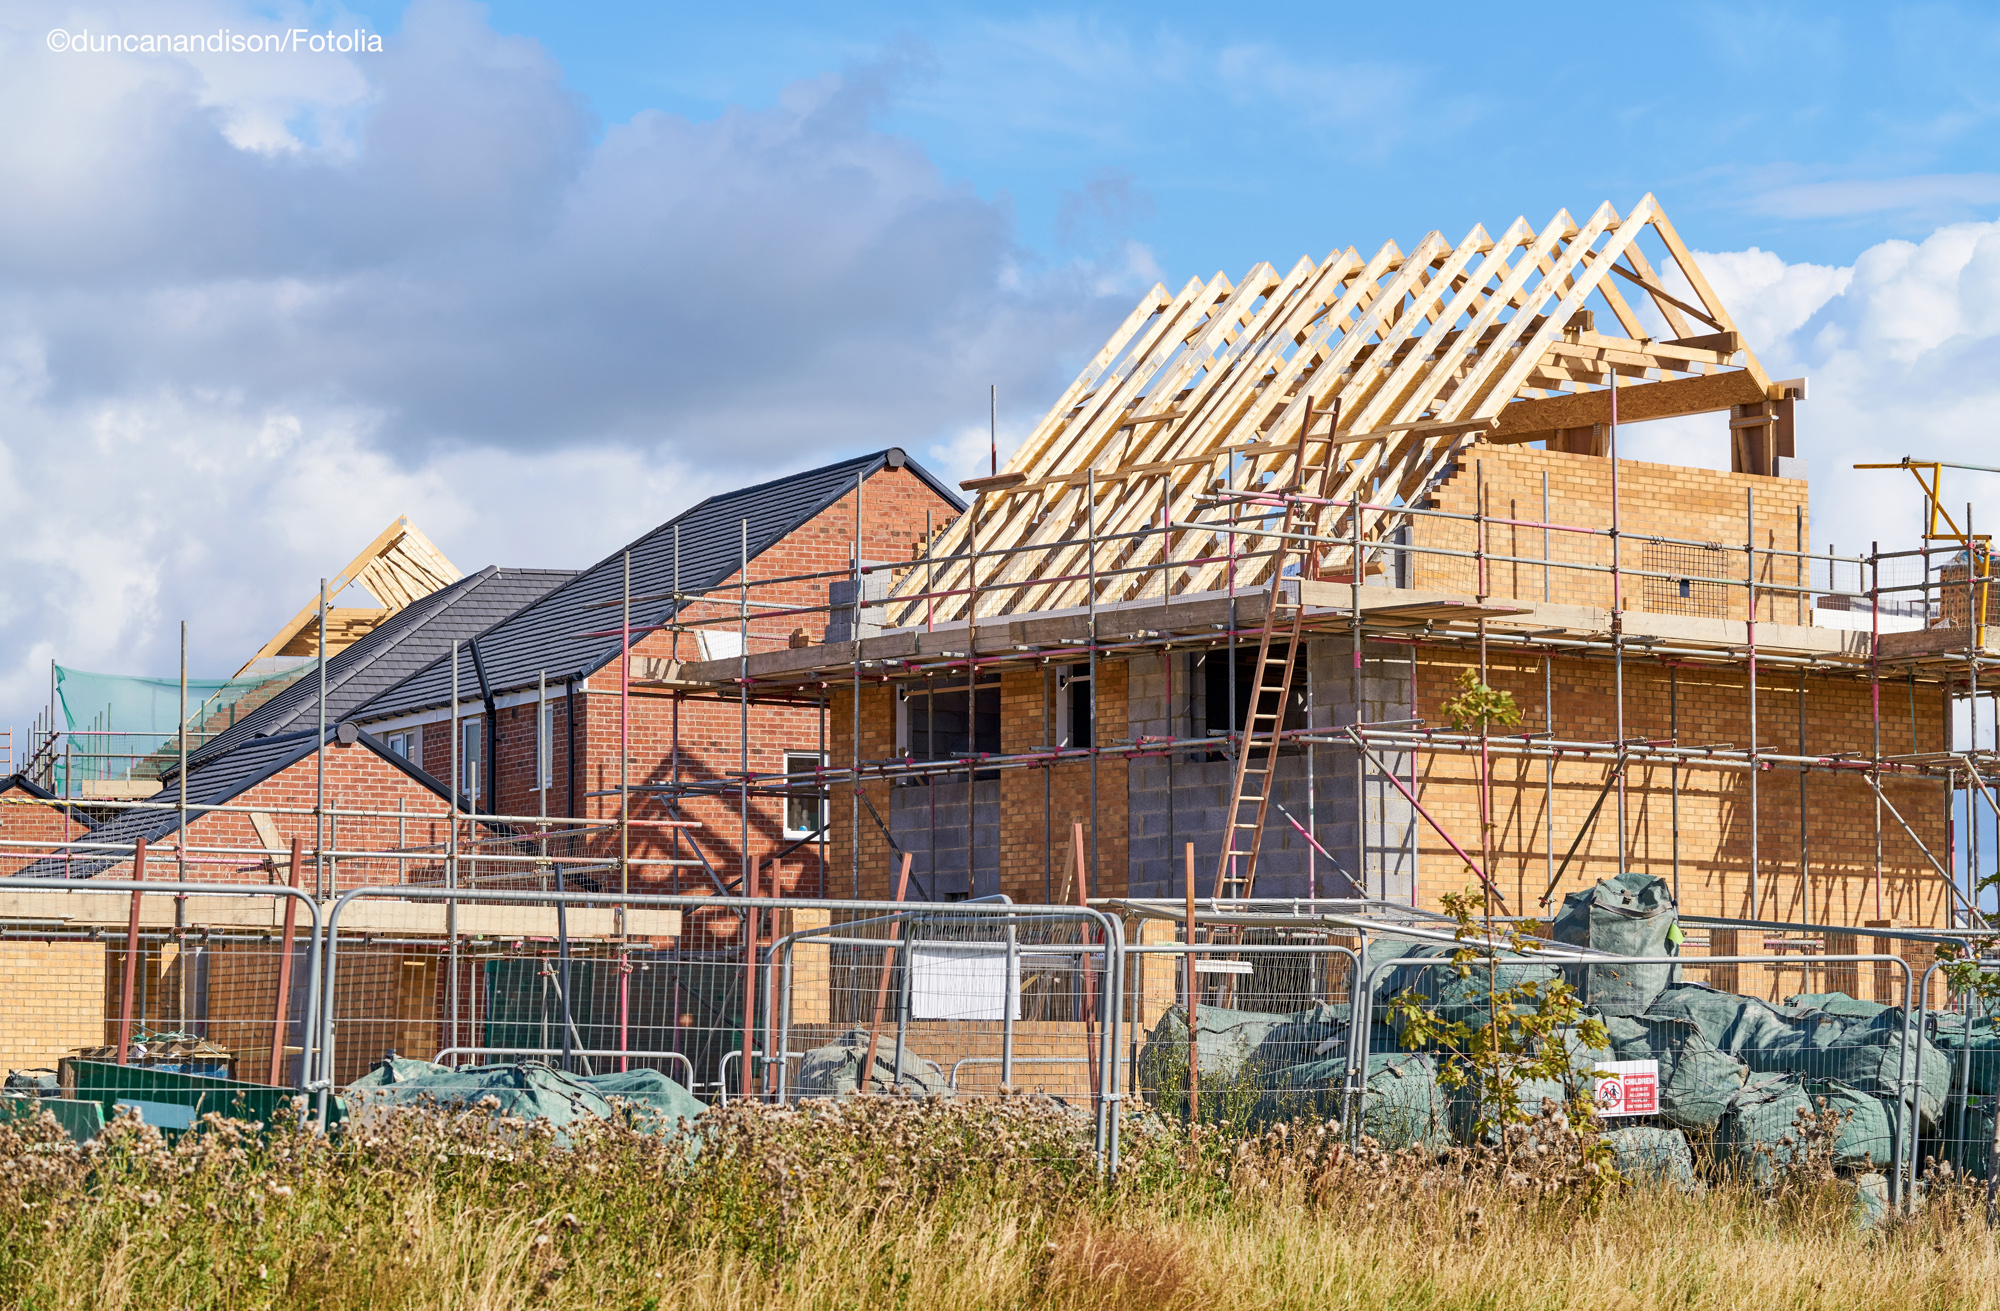 Government confirms £866m funding for council-led housing projects